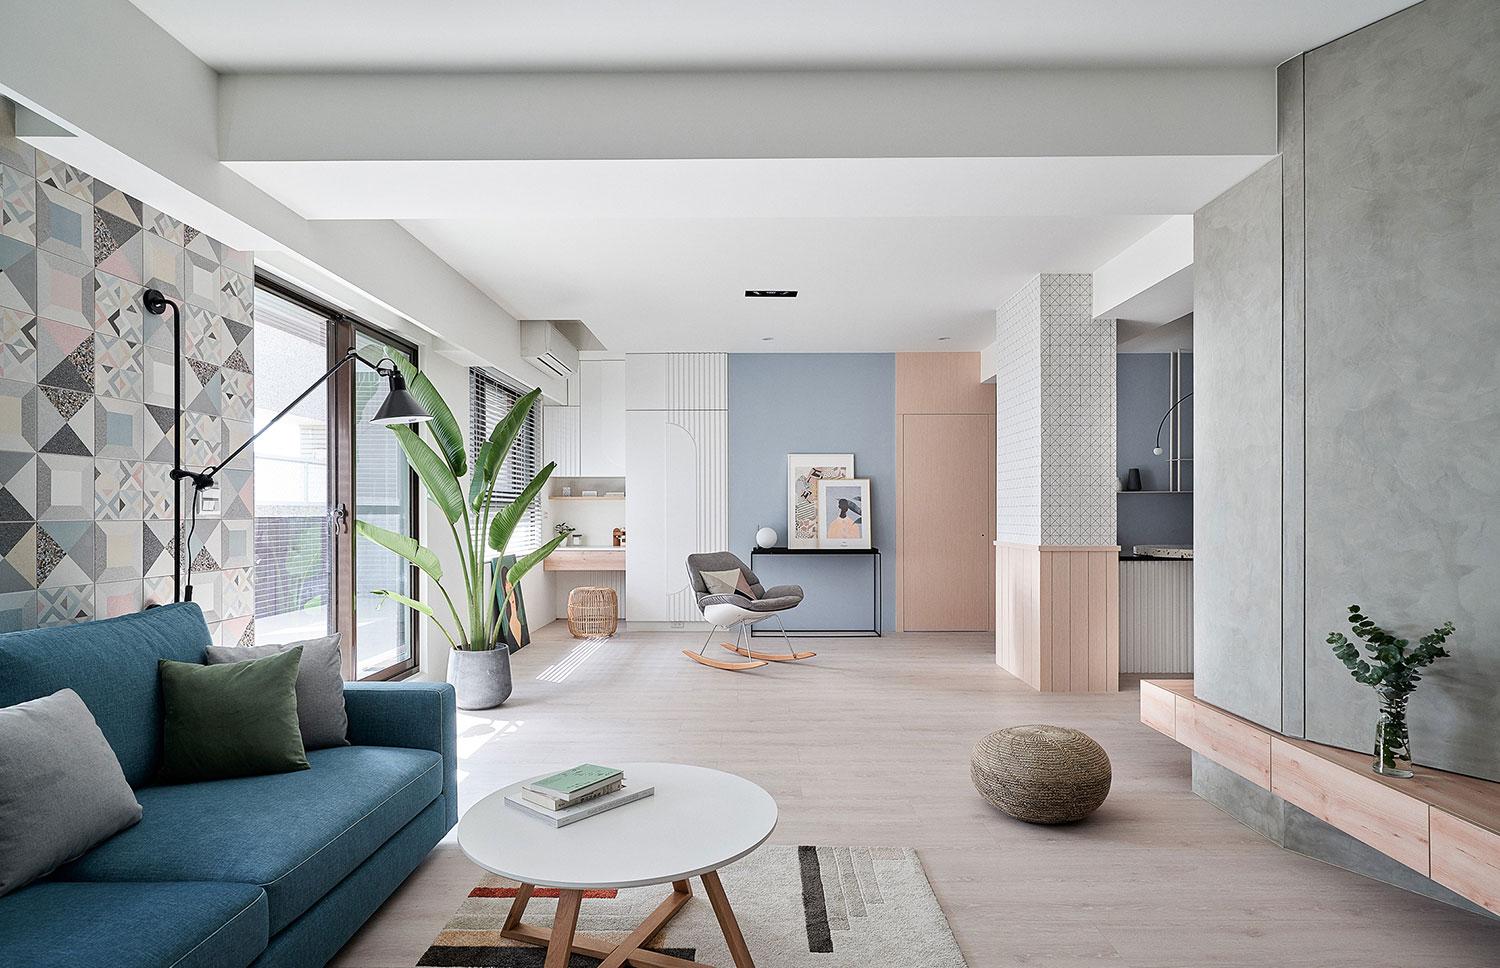 Step Inside a Whimsical Taiwan Apartment Inspired by Soft Rainbow Hues